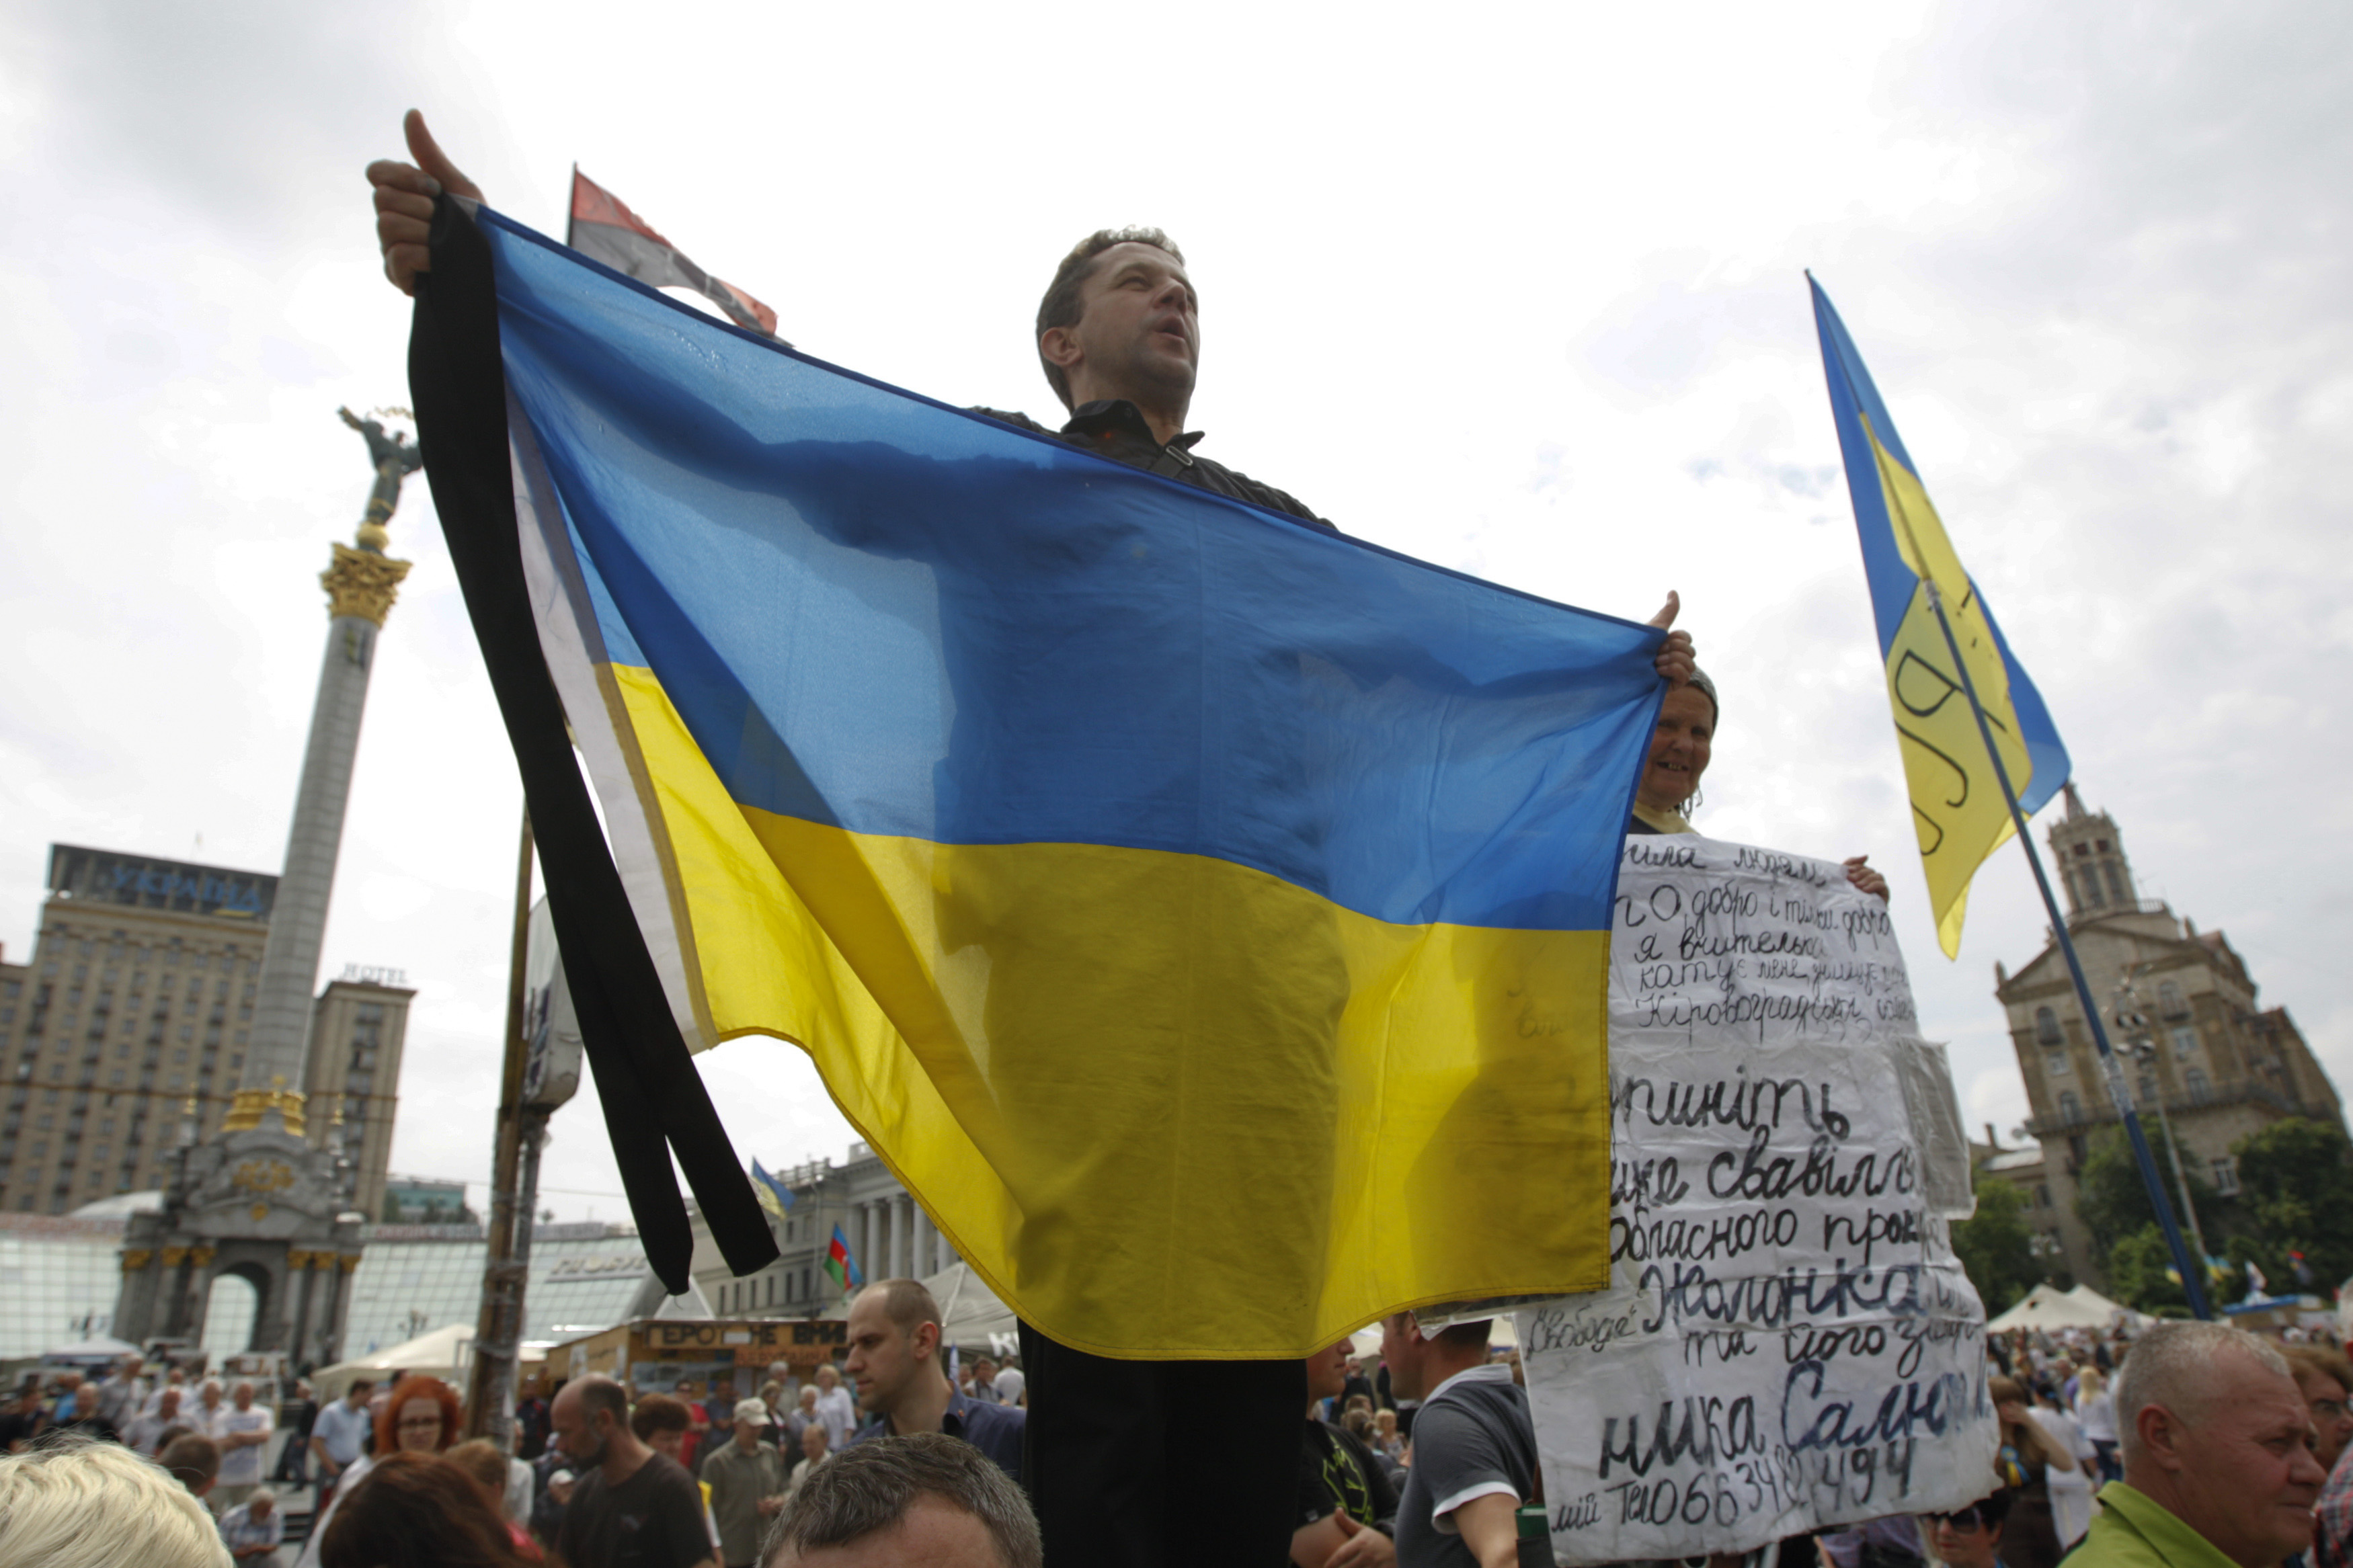 Ukrainians hold flags and signs bearing their latest concerns as they gather in a veche (people’s assembly) at Maidan Nezalezhnosti on Sunday, June 1. The meeting was the latest in a long public debate over the future of the Maidan movement that toppled the corrupt presidency of Viktor Yanukovych in February. REUTERS/Valentyn Ogirenko